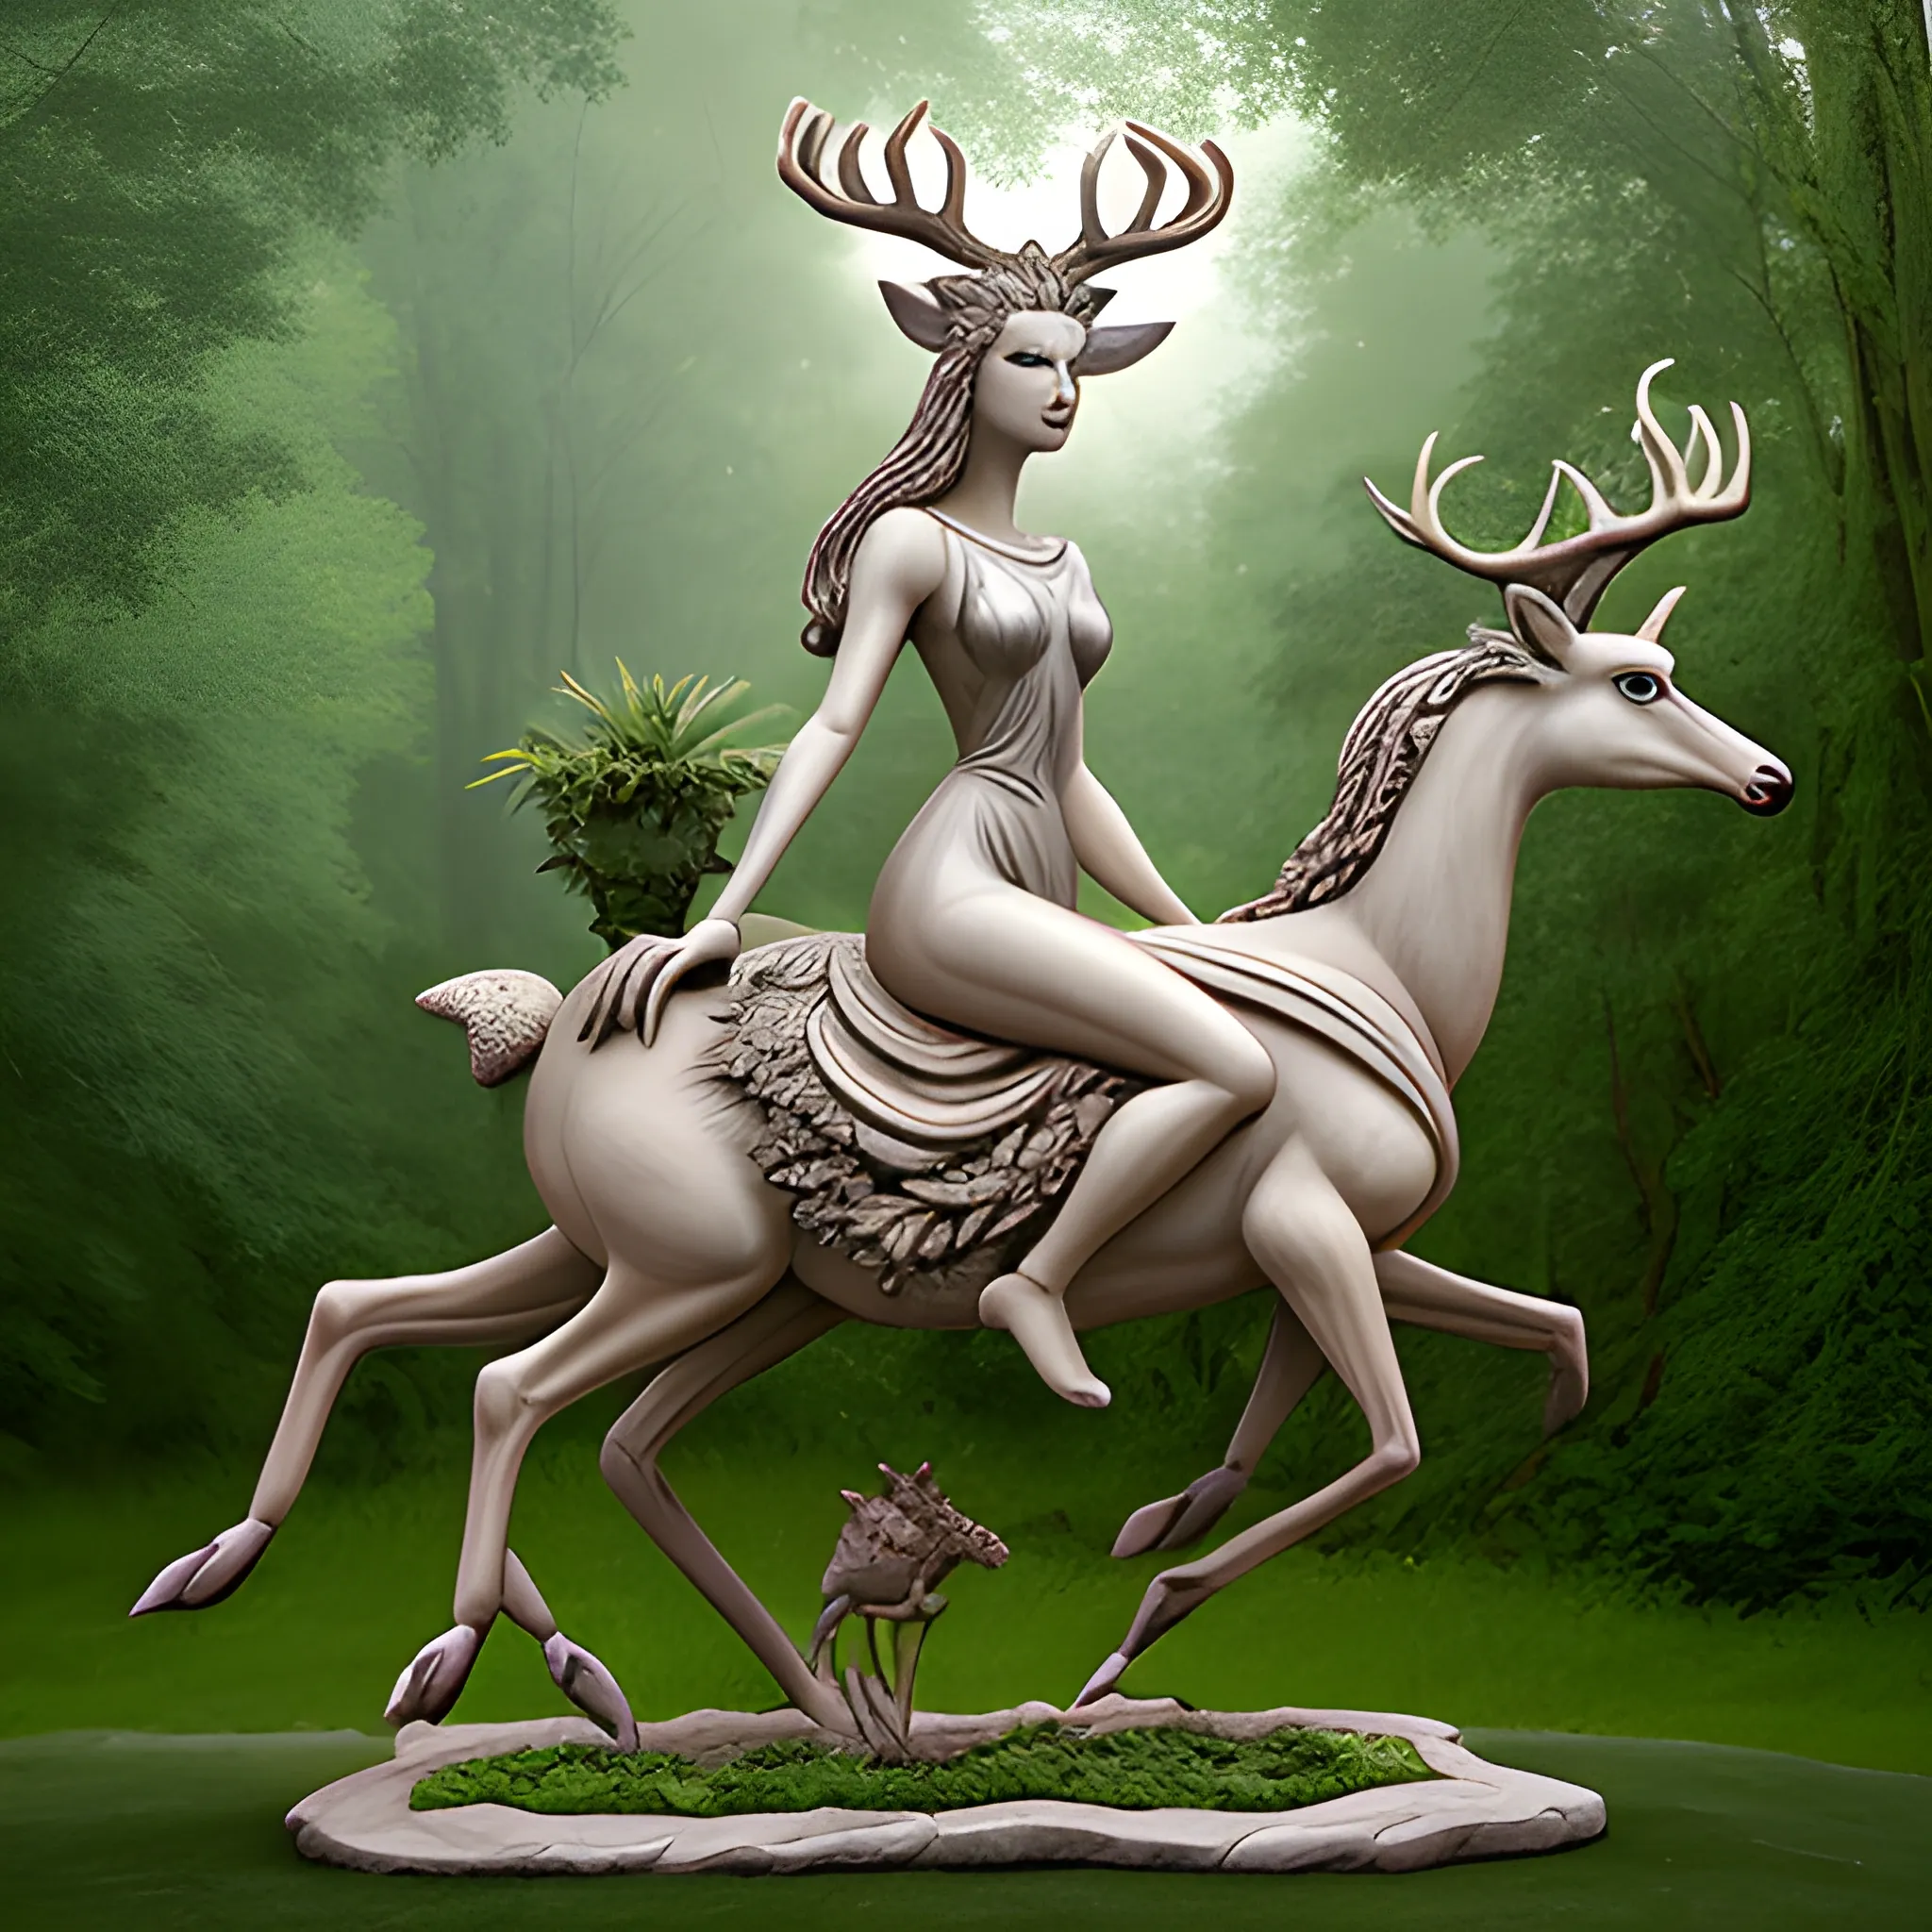 , Cartoon A hyperrealistic representation of a female goddess of deer and plants, riding a creature that fuses the elegance of the deer with the strength of the horse, created by a prodigious contemporary sculptor from the future